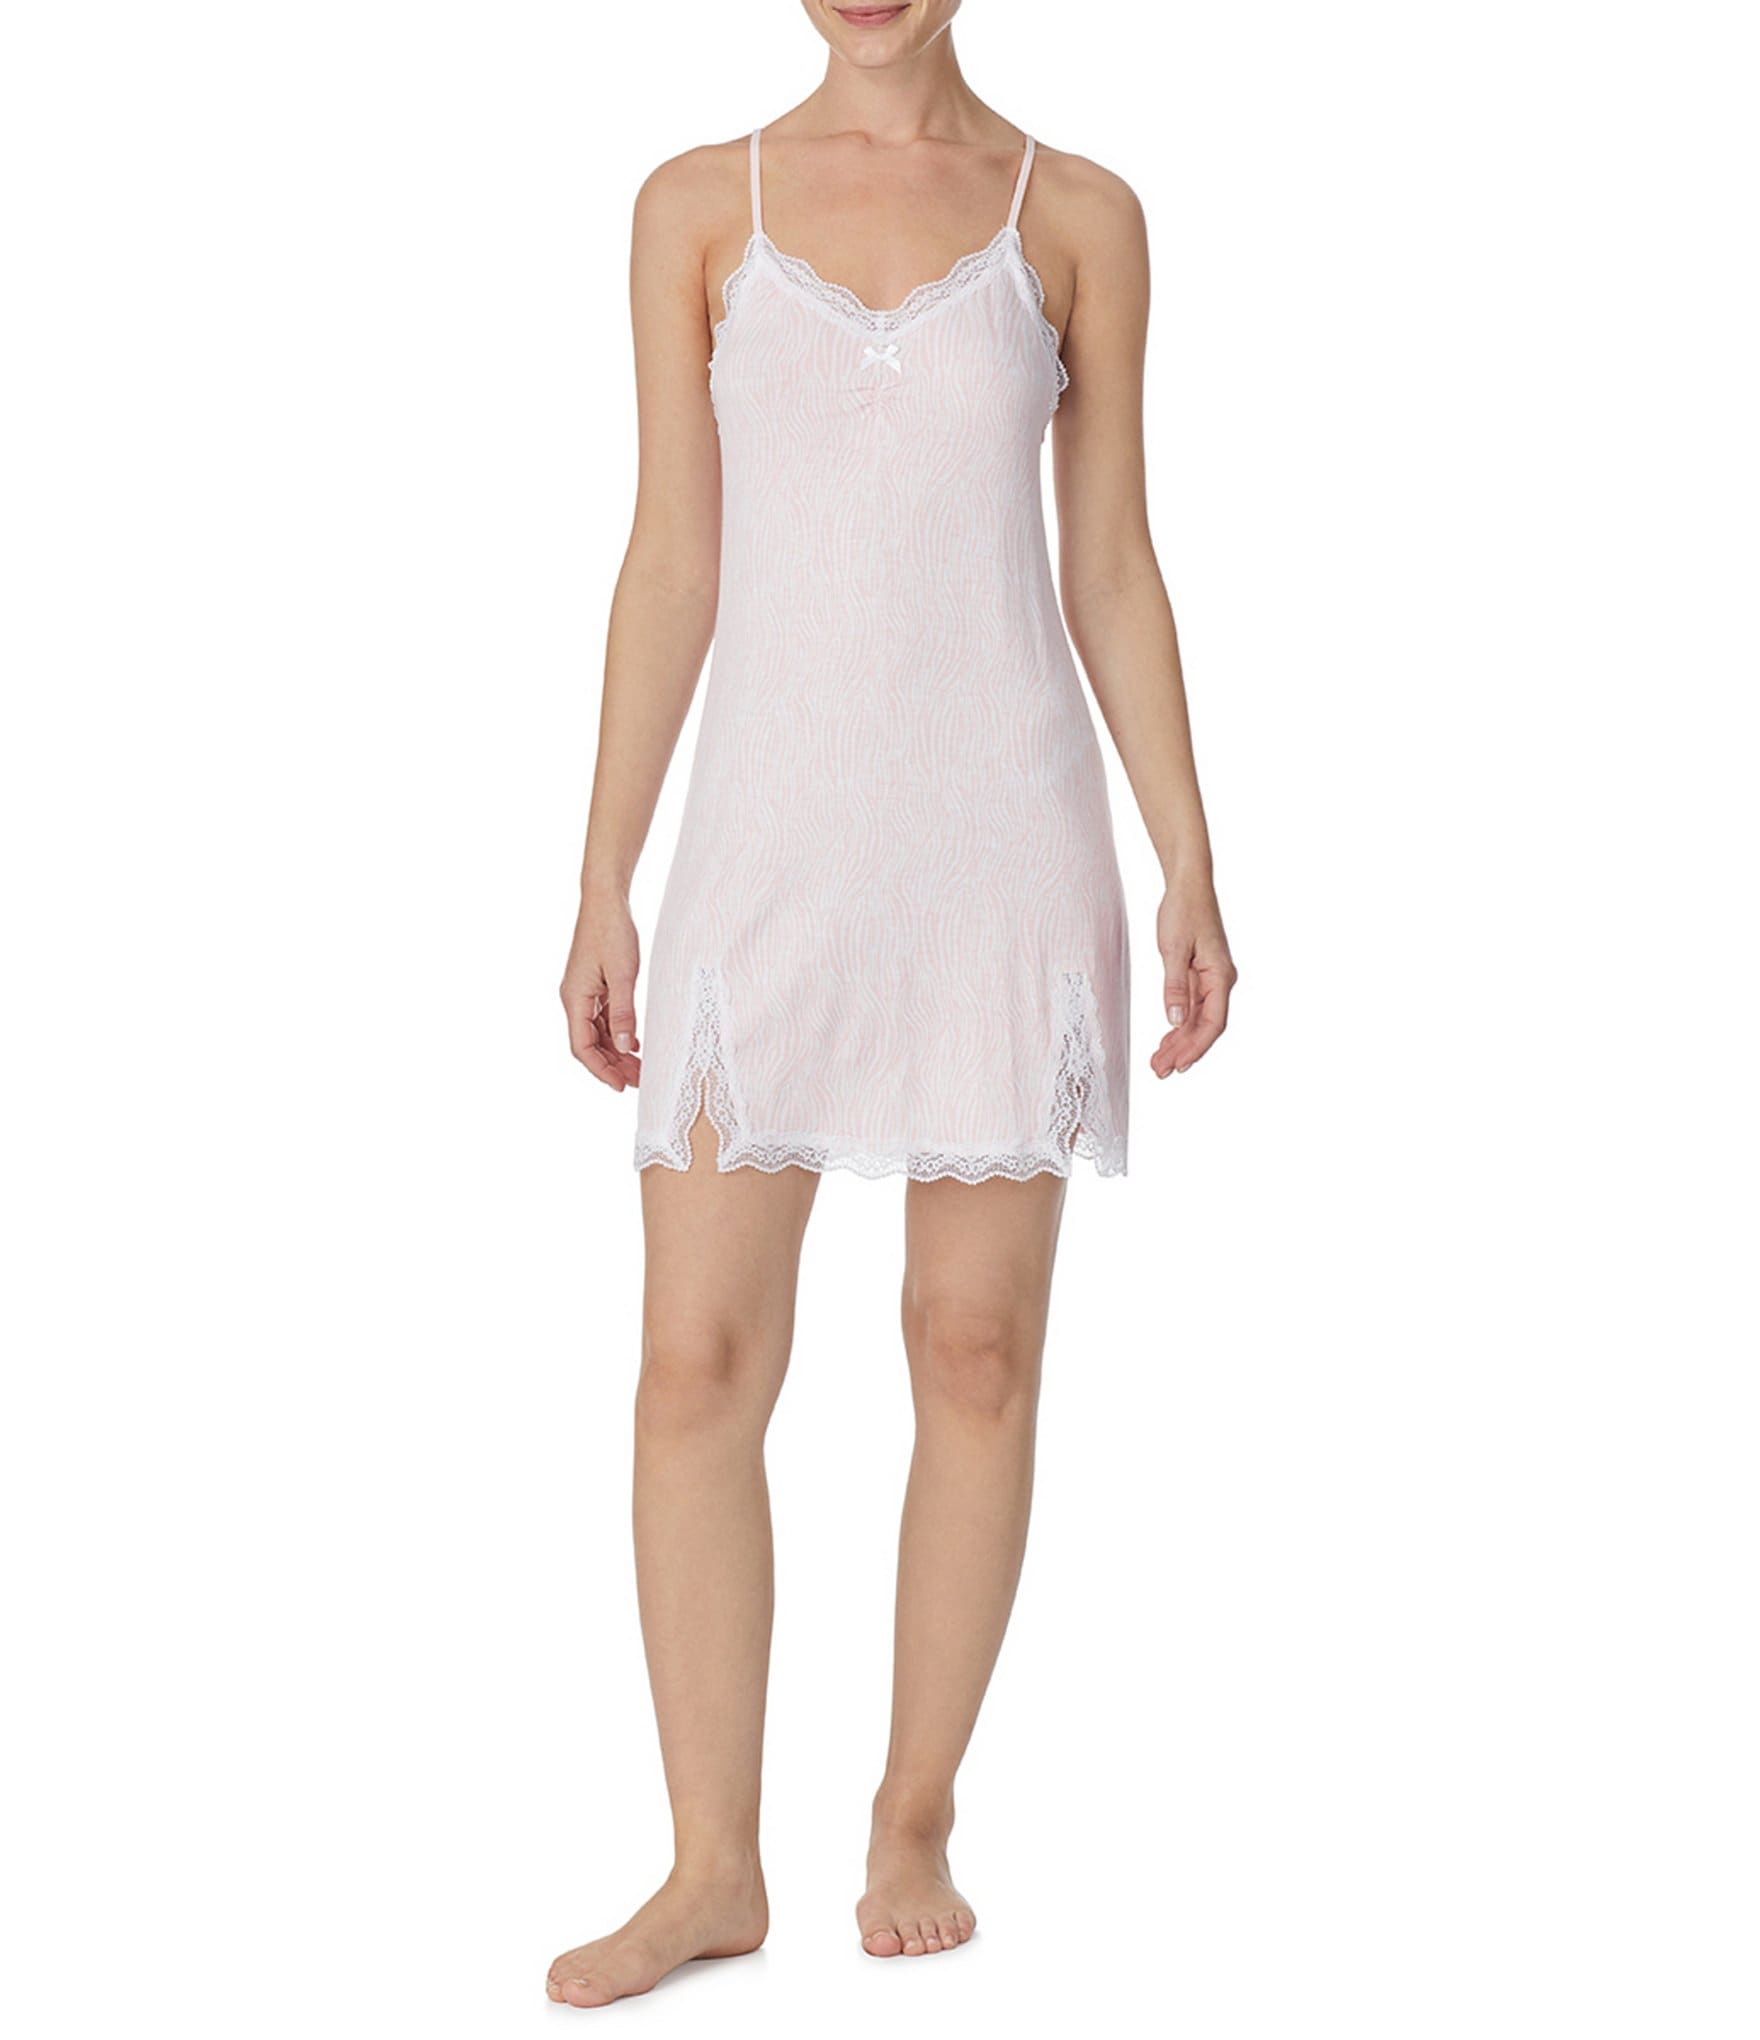 In Bloom by Jonquil Satin & Lace Long Nightgown | Dillard's